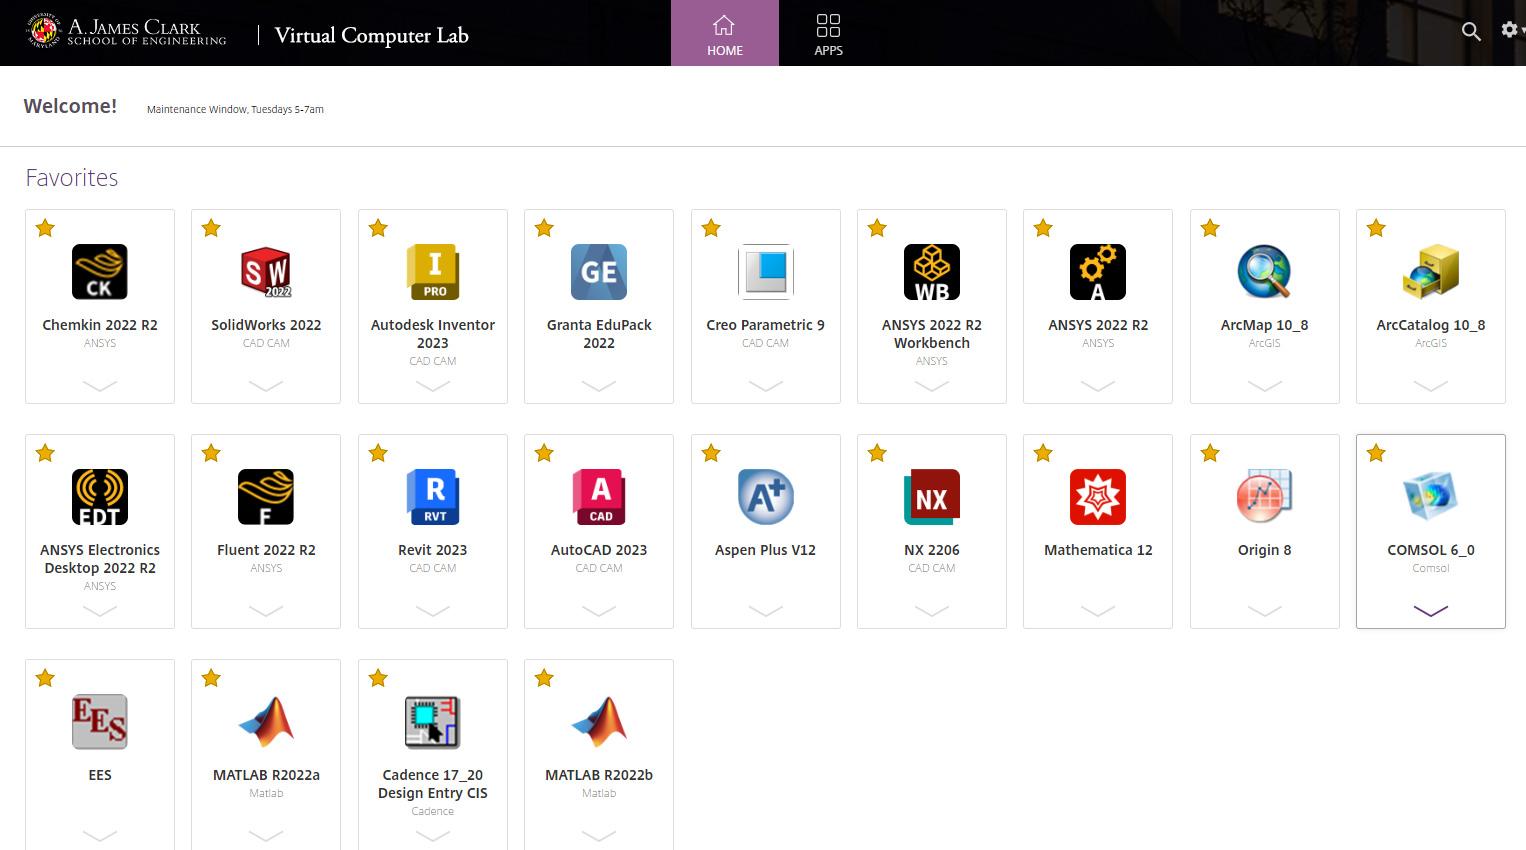 VCL apps page screenshot